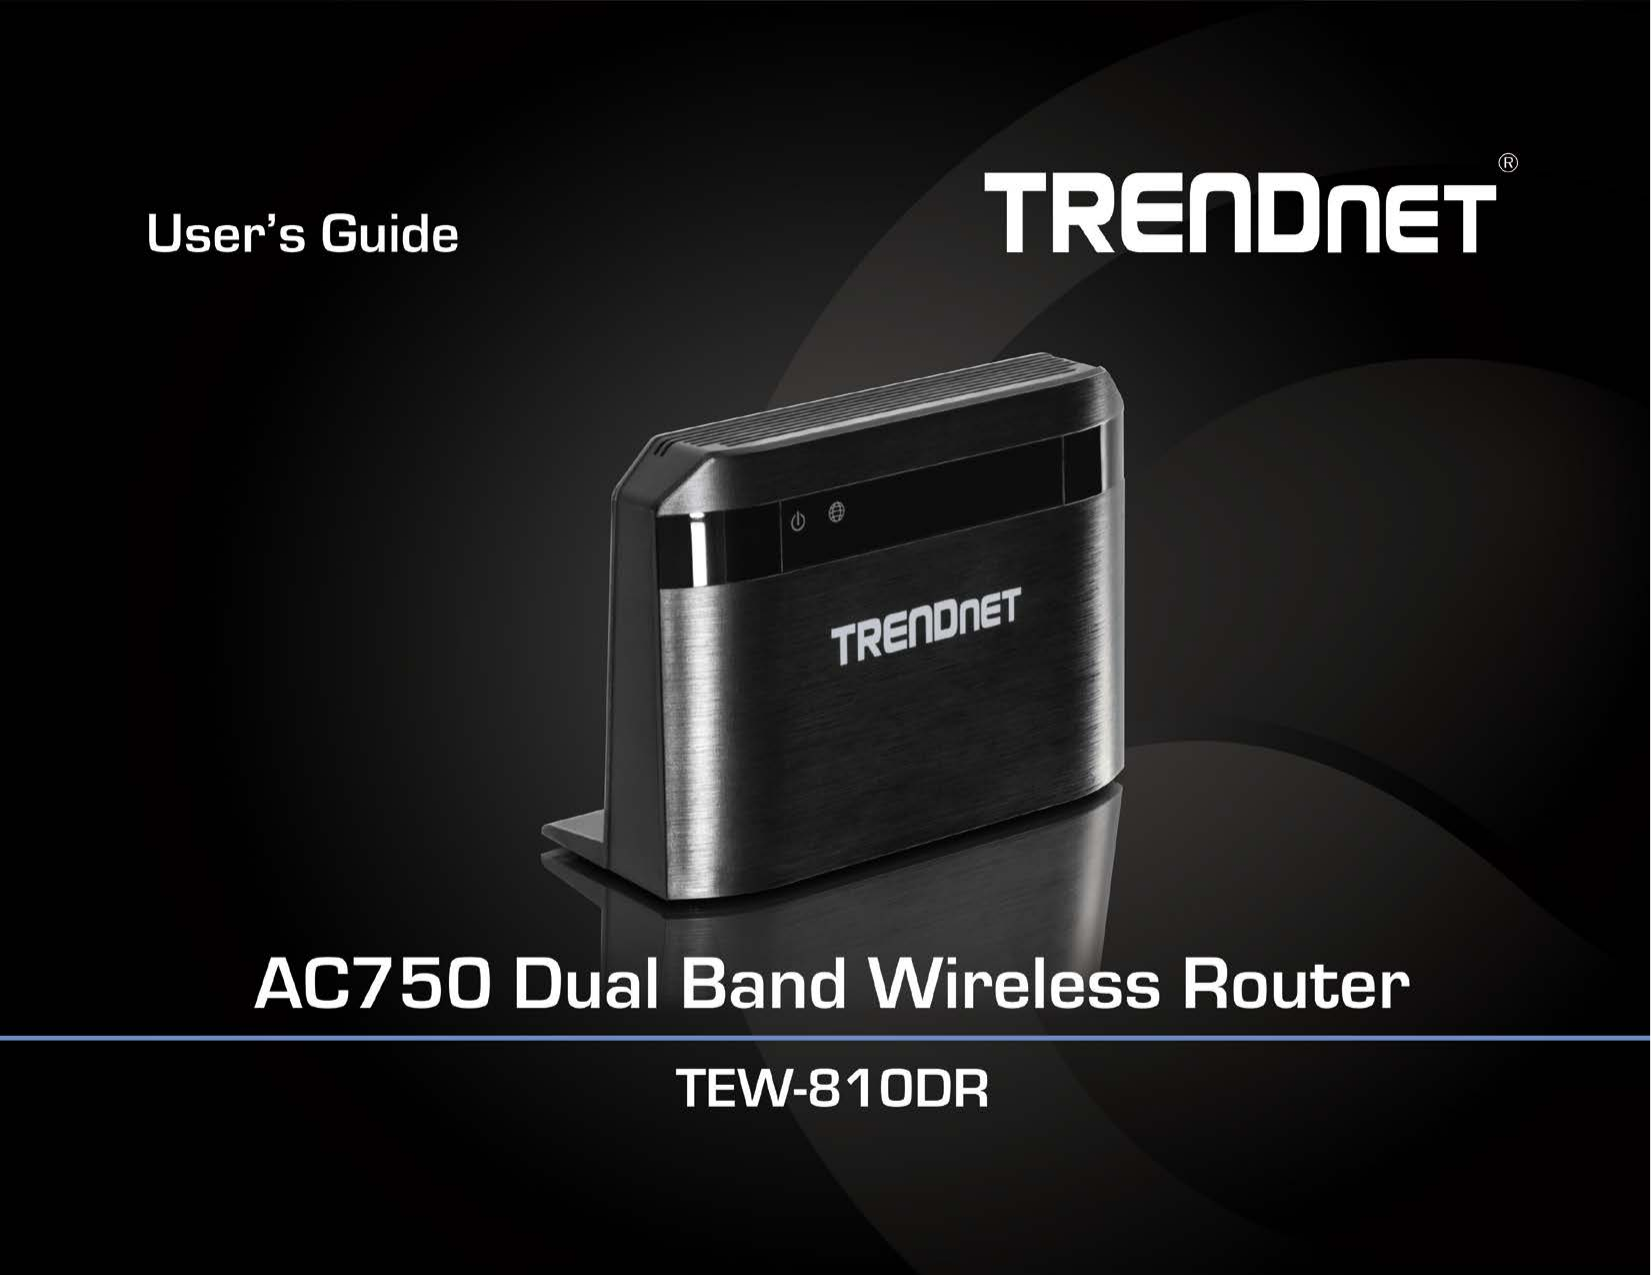              TRENDnet User’s Guide Cover Page  